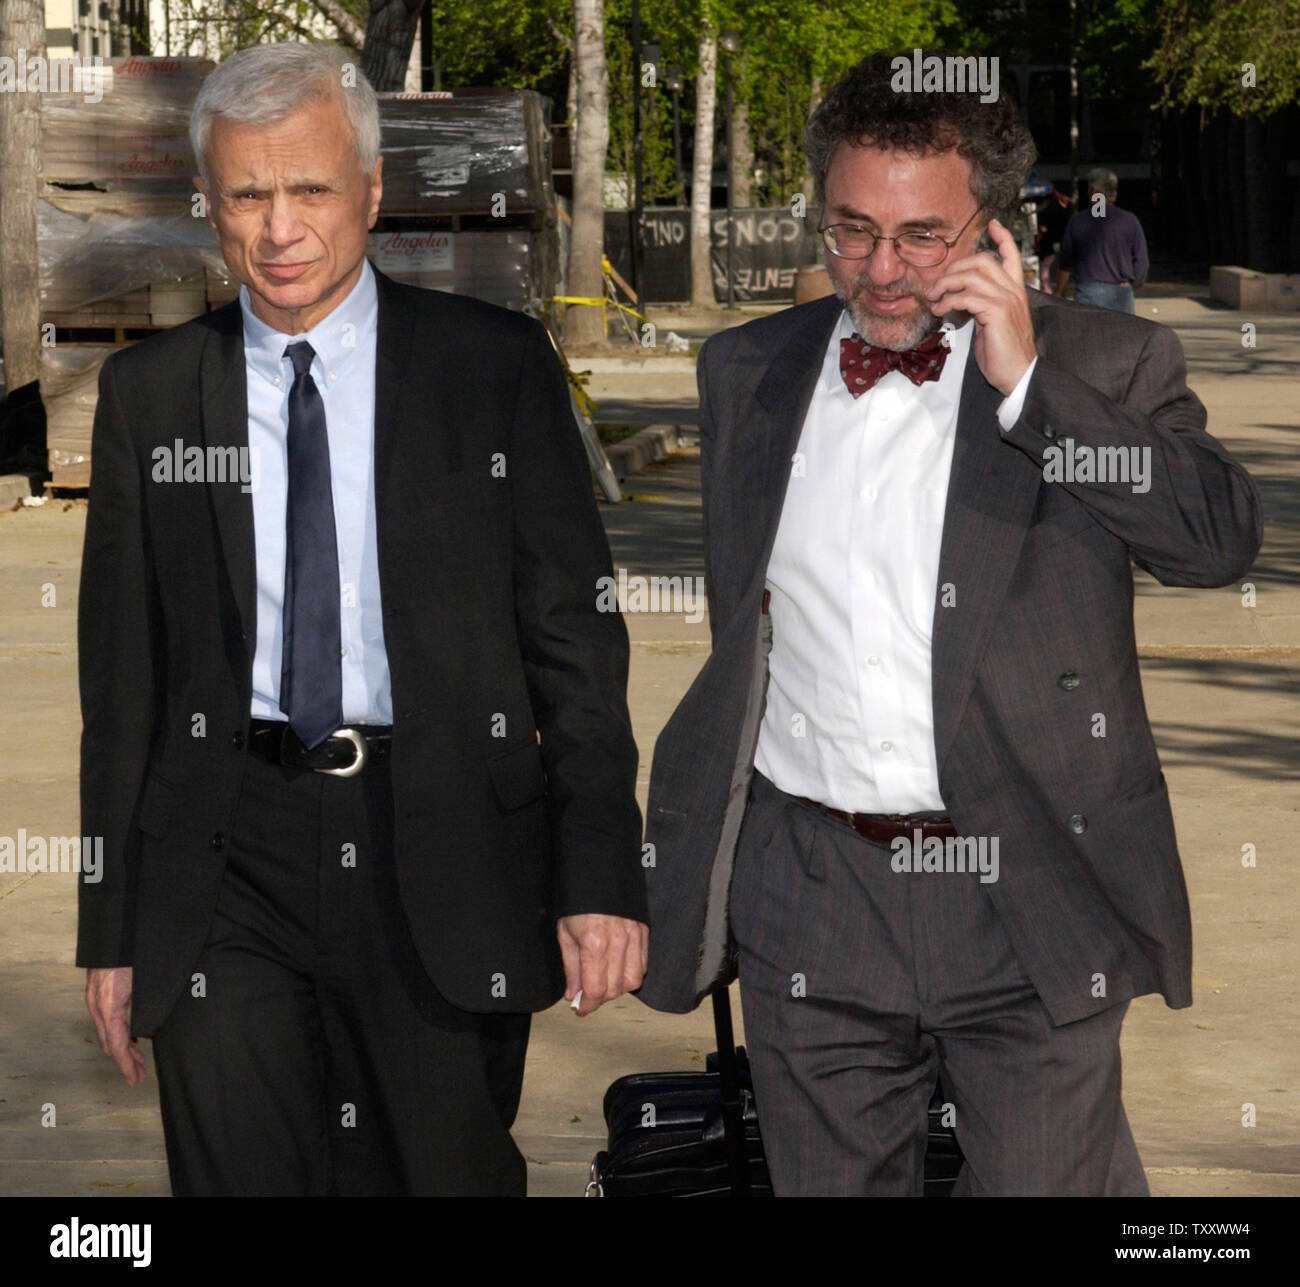 Actor Robert Blake (L) and his attorney M. Gerald Schwartzbach depart the Van Nuys courthouse after attending a court session in his murder trial, in Los Angeles March 15, 2005. Jurors in 'Baretta' star Robert Blake's murder trial continue after more than a week of deliberations without a verdict, increasing speculation they may deadlock over whether the actor shot and killed his wife outside his favorite restaurant.   (UPI Photo/Jim Ruymen) Stock Photo